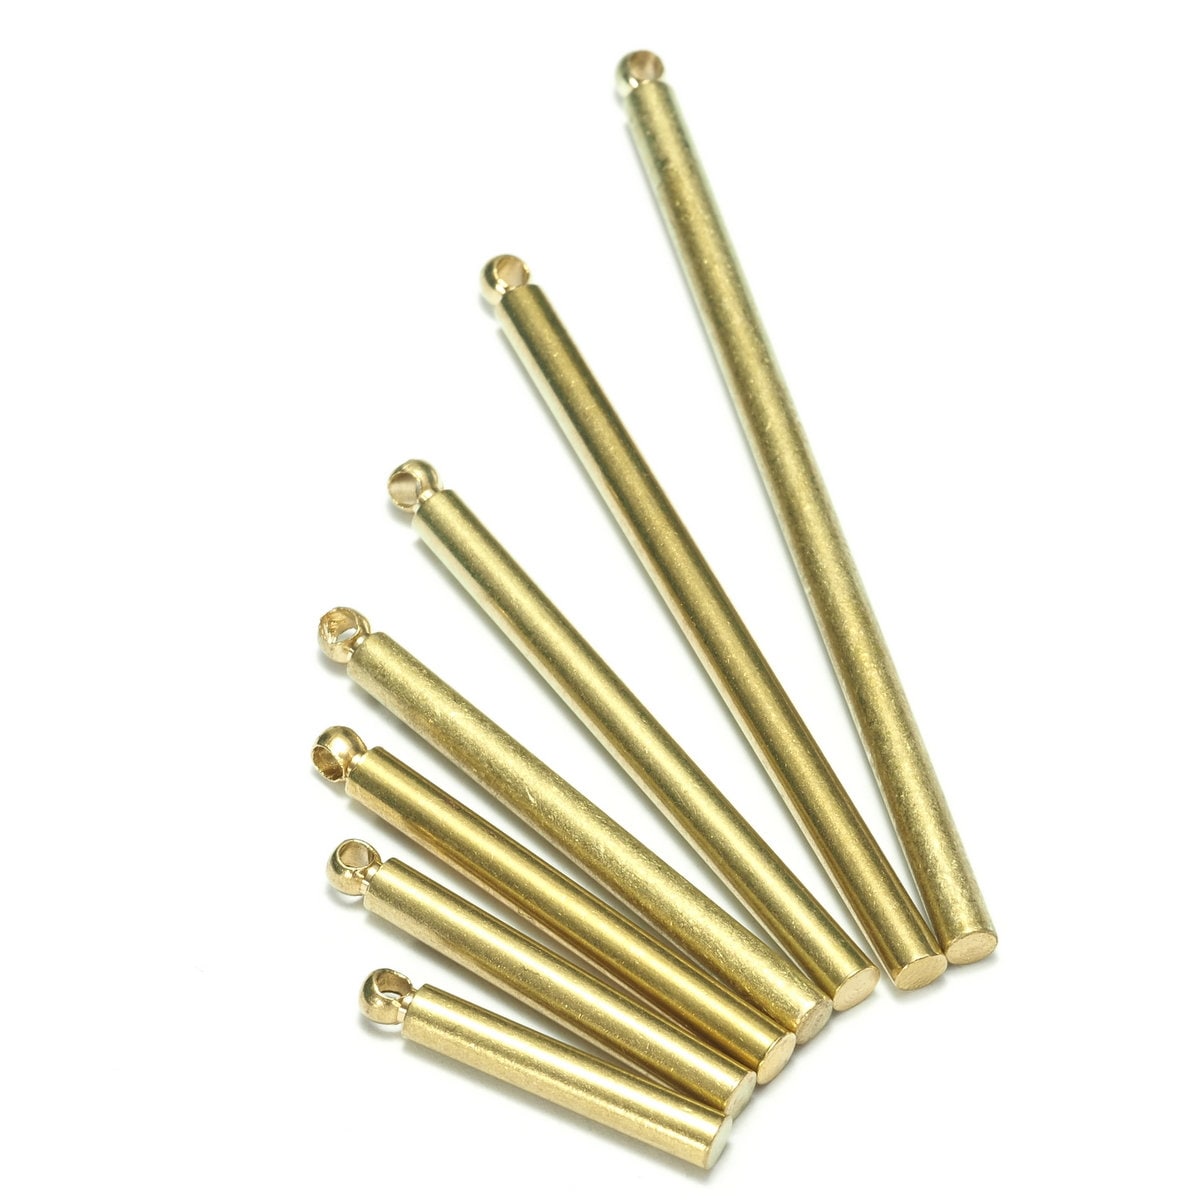 Brass Round Bar 30 mm Various Lengths Available 